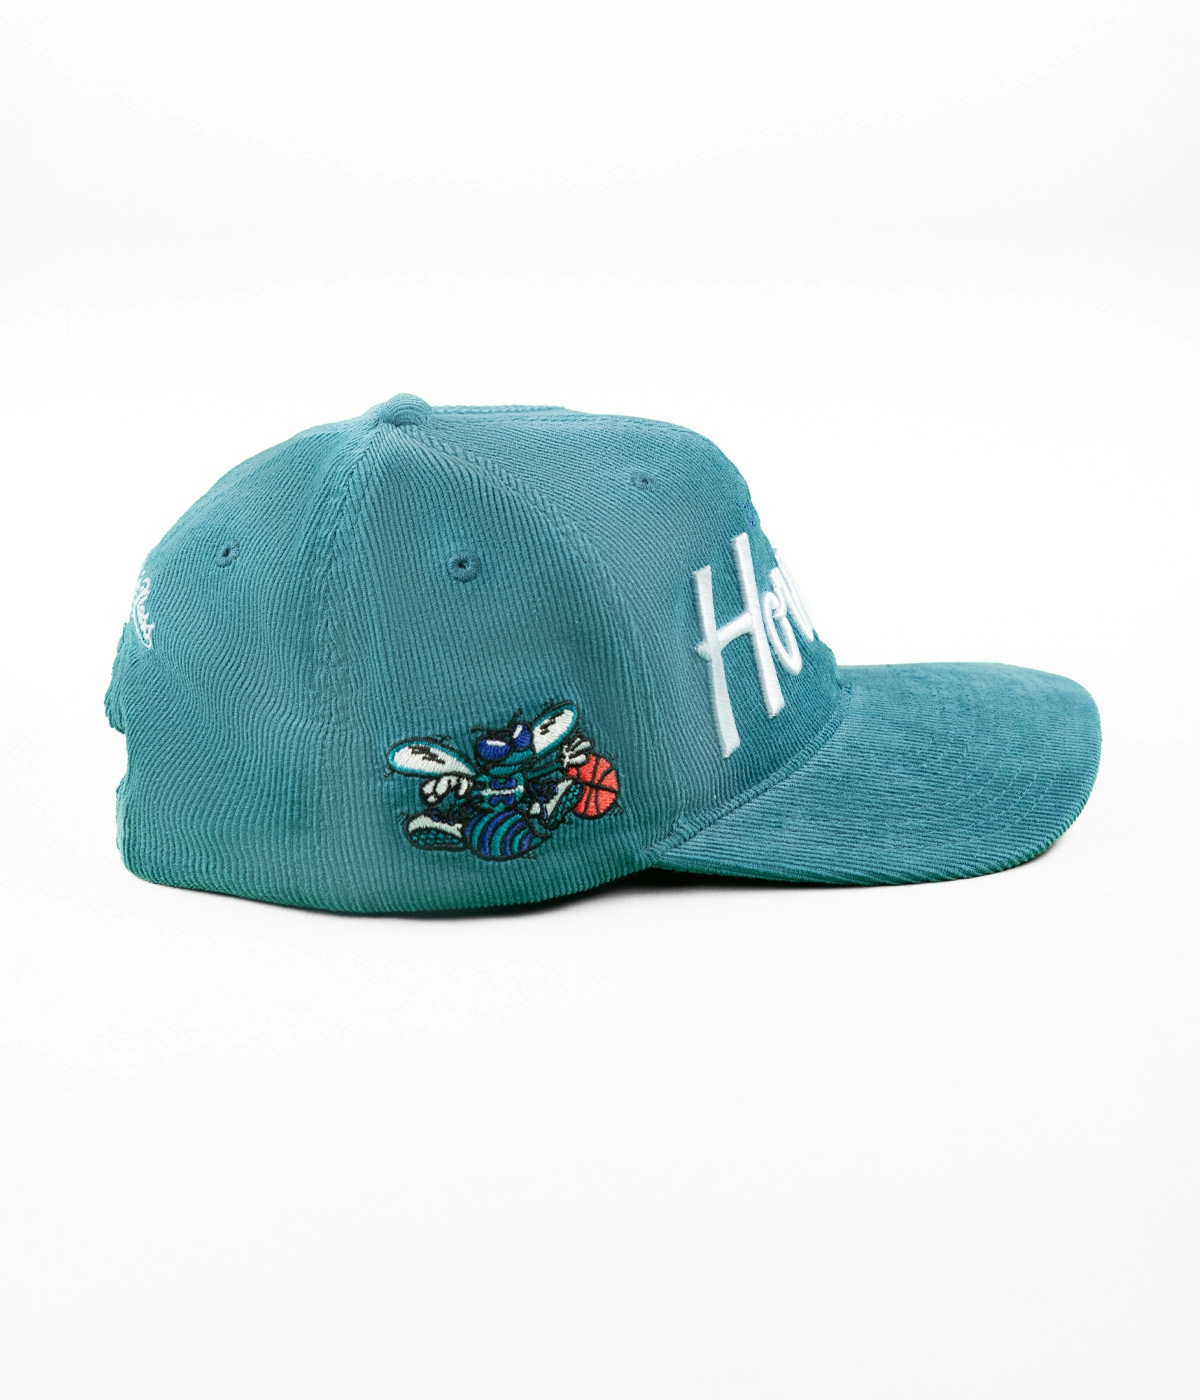 Mitchell & Ness Montage Cord Snapback - Charlotte Hornets Cap Teal 3